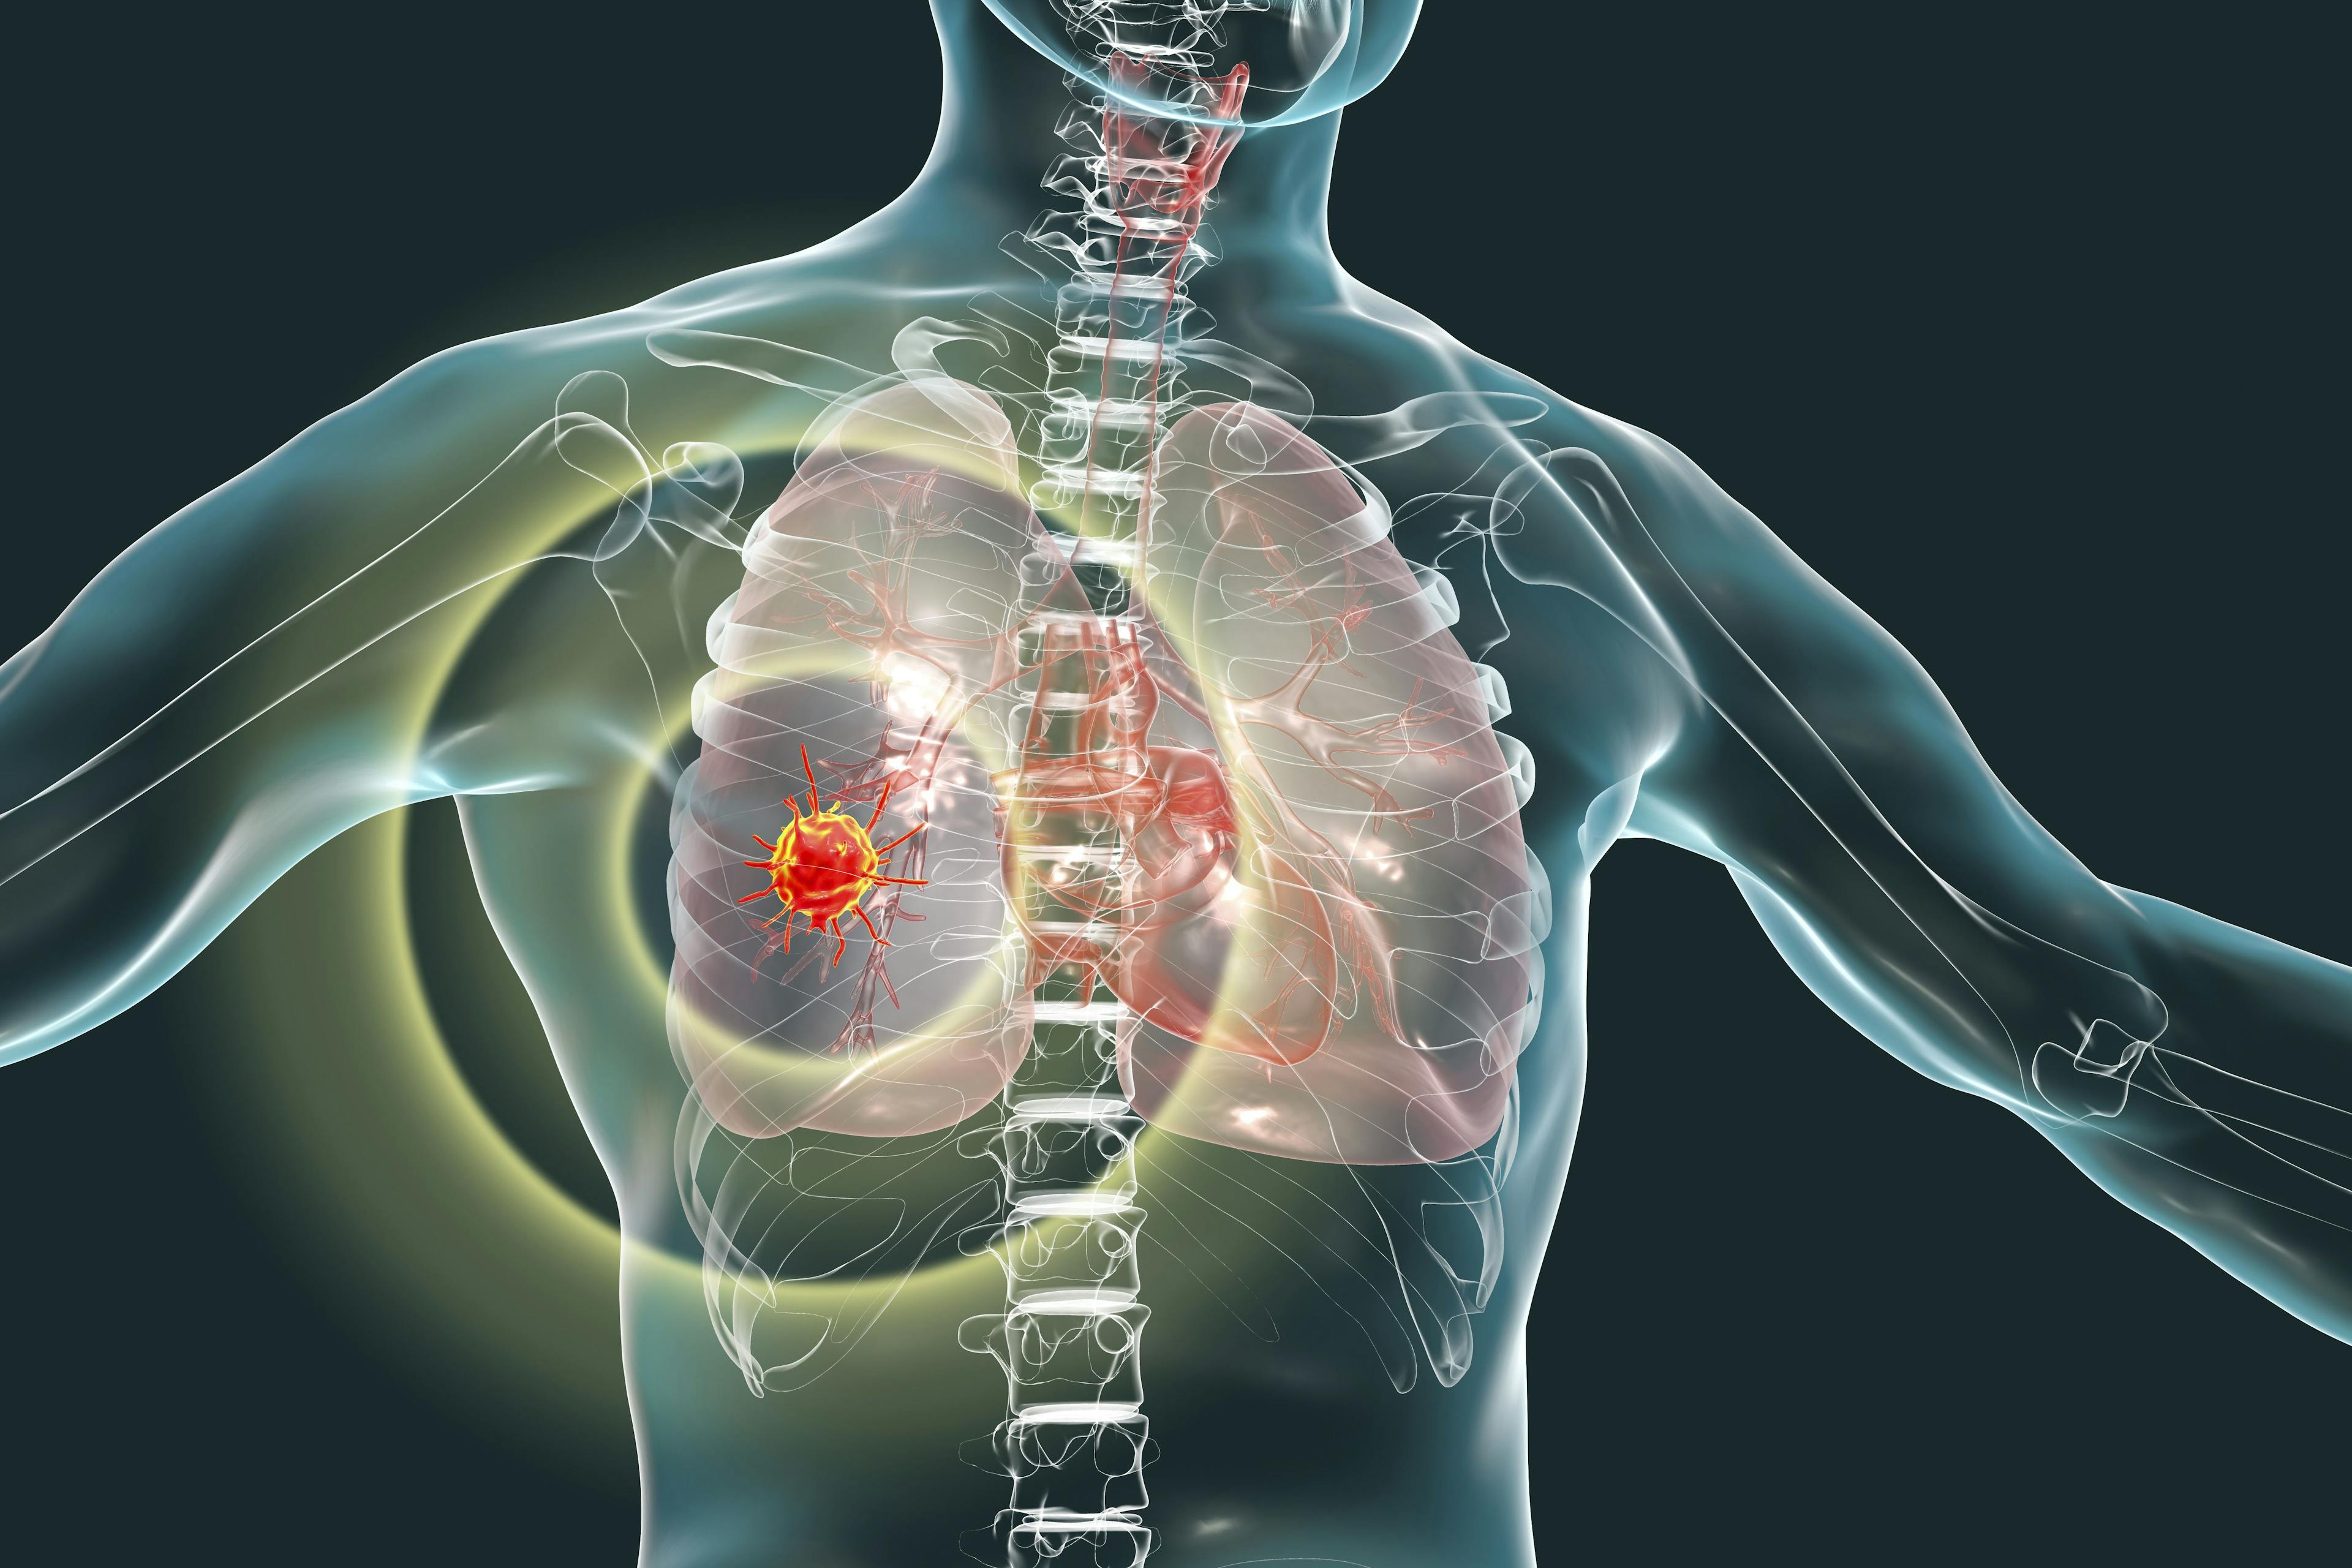 Findings from the phase 3 ADURA trial indicated that patients with EGFR-mutated, stage II to IIIA non–small cell lung cancer (NSCLC) experienced a promising reduction in risk of disease recurrence or death following treatment with adjuvant osimertinib.